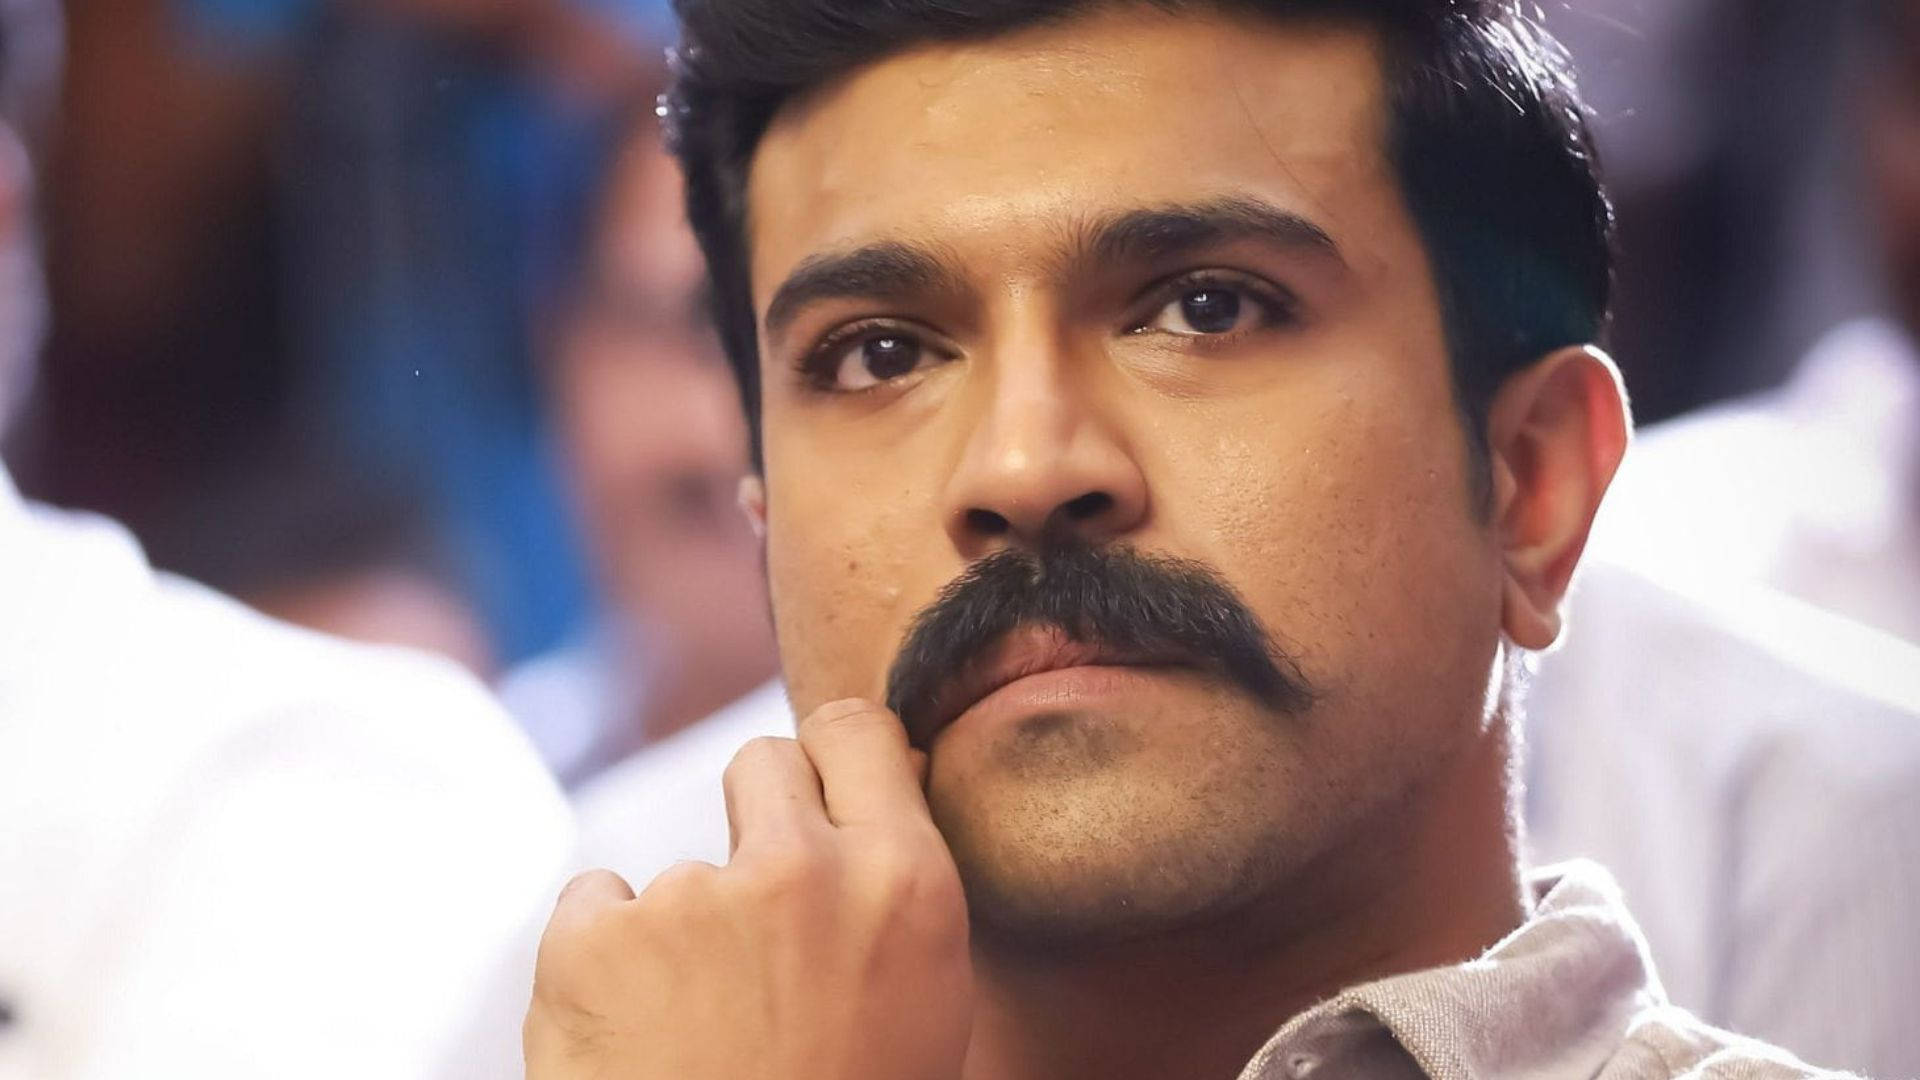 Ram Charan Hd Playing With Mustache Background